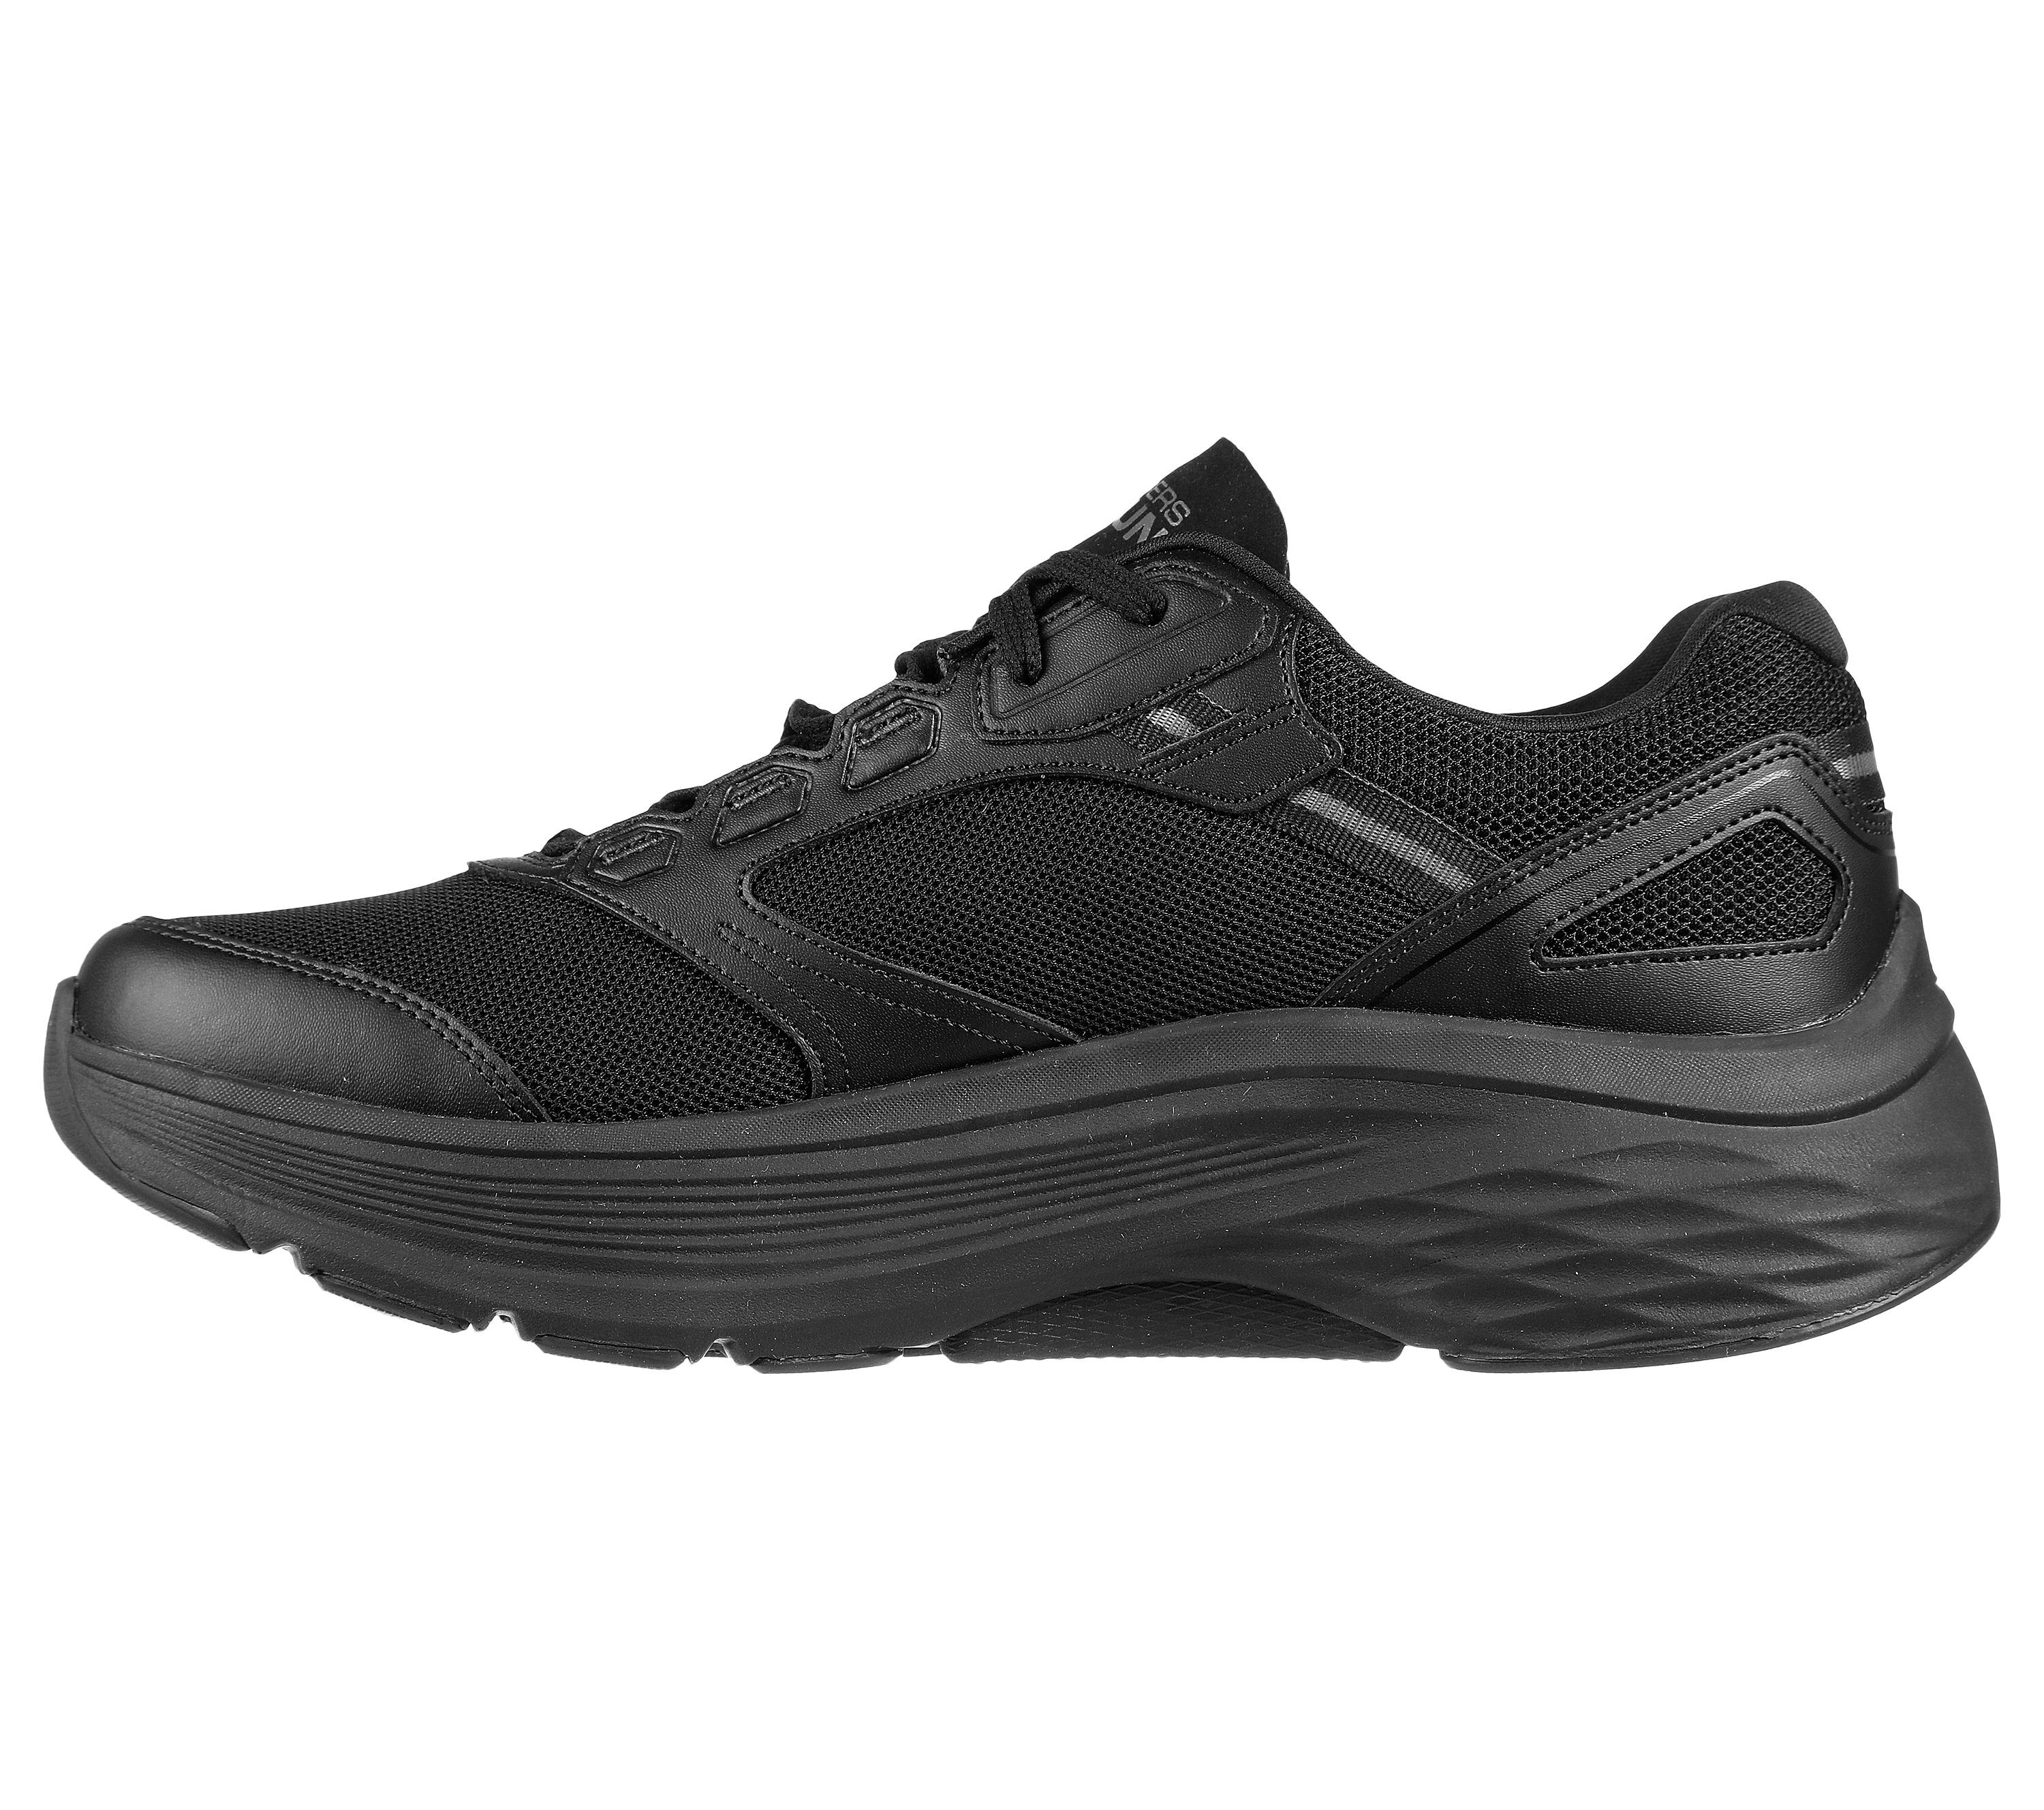 Shop the Skechers Max Cushioning Arch Fit - Rugged Man | SKECHERS